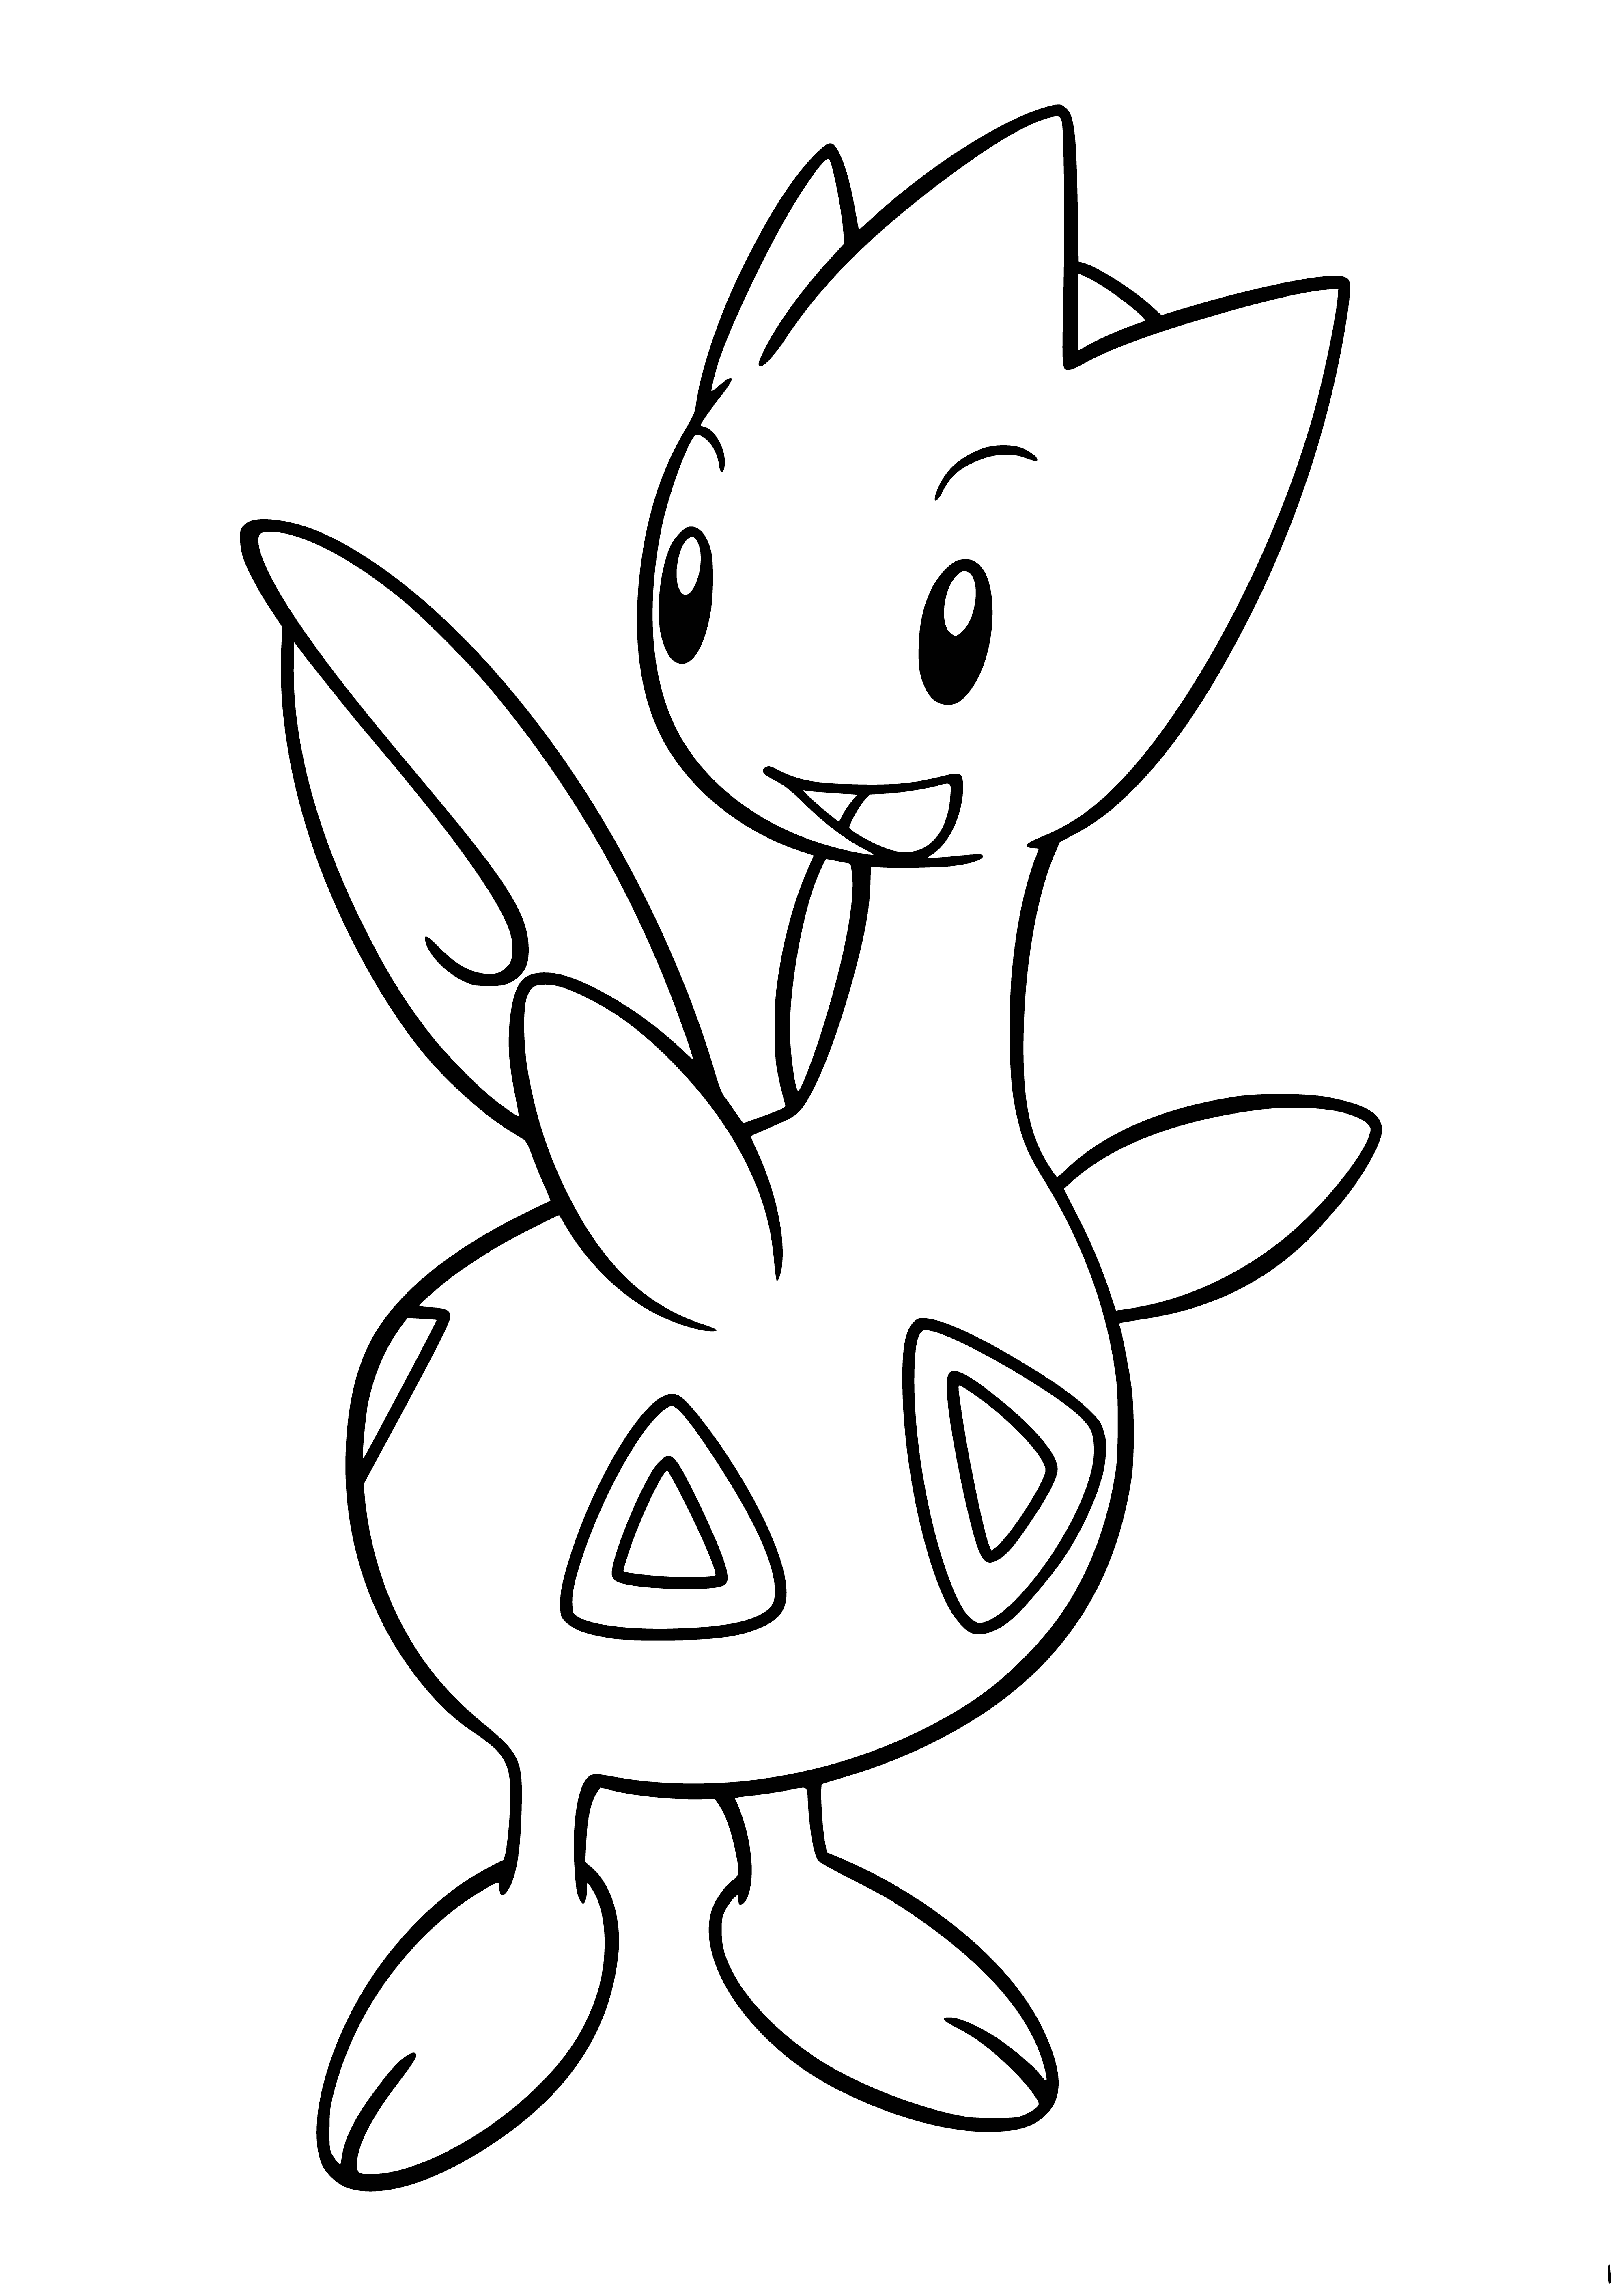 Pokemon Togetic (Togetic) coloring page